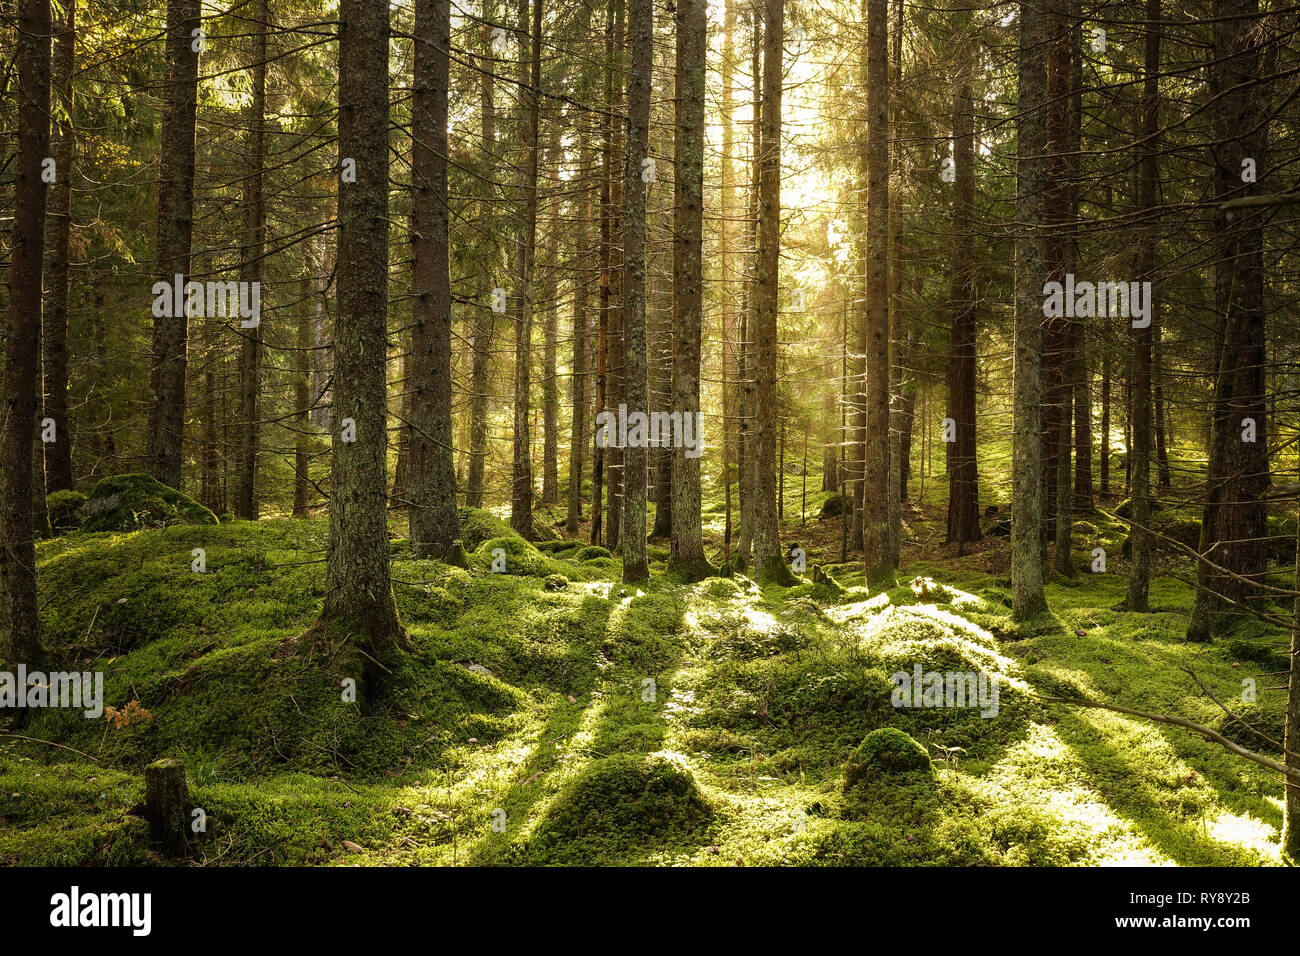 Beautiful coniferous forest. Backlit trees in warm cozy sunset. Stones and ground covered of green moss. Stock Photo